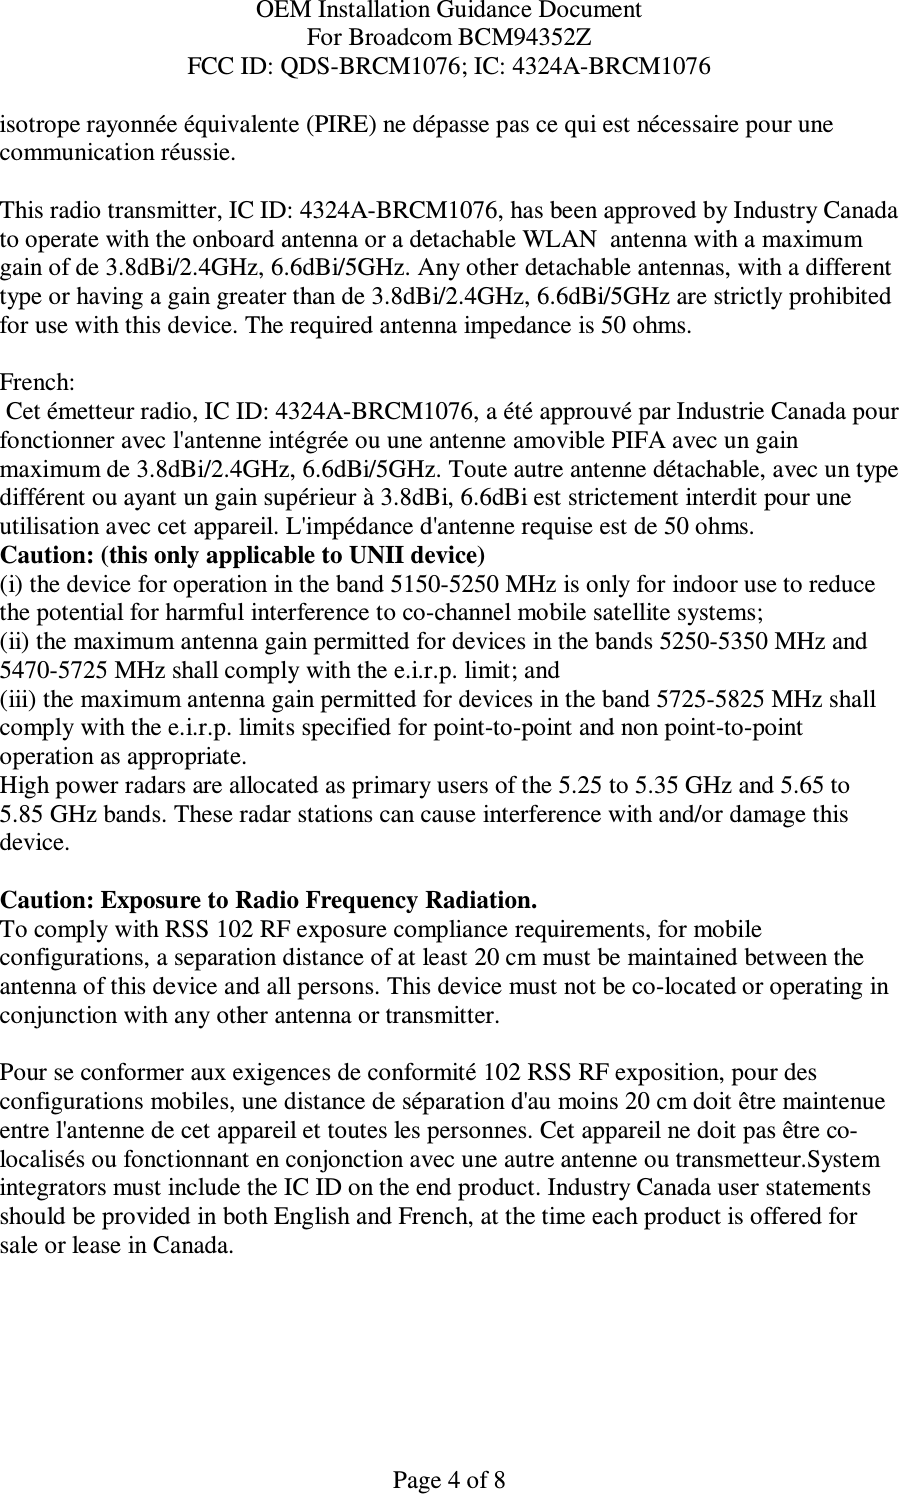 OEM Installation Guidance Document For Broadcom BCM94352Z FCC ID: QDS-BRCM1076; IC: 4324A-BRCM1076  Page 4 of 8 isotrope rayonnée équivalente (PIRE) ne dépasse pas ce qui est nécessaire pour une communication réussie.  This radio transmitter, IC ID: 4324A-BRCM1076, has been approved by Industry Canada to operate with the onboard antenna or a detachable WLAN  antenna with a maximum gain of de 3.8dBi/2.4GHz, 6.6dBi/5GHz. Any other detachable antennas, with a different type or having a gain greater than de 3.8dBi/2.4GHz, 6.6dBi/5GHz are strictly prohibited for use with this device. The required antenna impedance is 50 ohms.  French:   Cet émetteur radio, IC ID: 4324A-BRCM1076, a été approuvé par Industrie Canada pour fonctionner avec l&apos;antenne intégrée ou une antenne amovible PIFA avec un gain maximum de 3.8dBi/2.4GHz, 6.6dBi/5GHz. Toute autre antenne détachable, avec un type différent ou ayant un gain supérieur à 3.8dBi, 6.6dBi est strictement interdit pour une utilisation avec cet appareil. L&apos;impédance d&apos;antenne requise est de 50 ohms. Caution: (this only applicable to UNII device) (i) the device for operation in the band 5150-5250 MHz is only for indoor use to reduce the potential for harmful interference to co-channel mobile satellite systems; (ii) the maximum antenna gain permitted for devices in the bands 5250-5350 MHz and 5470-5725 MHz shall comply with the e.i.r.p. limit; and (iii) the maximum antenna gain permitted for devices in the band 5725-5825 MHz shall comply with the e.i.r.p. limits specified for point-to-point and non point-to-point operation as appropriate. High power radars are allocated as primary users of the 5.25 to 5.35 GHz and 5.65 to 5.85 GHz bands. These radar stations can cause interference with and/or damage this device.  Caution: Exposure to Radio Frequency Radiation. To comply with RSS 102 RF exposure compliance requirements, for mobile configurations, a separation distance of at least 20 cm must be maintained between the antenna of this device and all persons. This device must not be co-located or operating in conjunction with any other antenna or transmitter.  Pour se conformer aux exigences de conformité 102 RSS RF exposition, pour des configurations mobiles, une distance de séparation d&apos;au moins 20 cm doit être maintenue entre l&apos;antenne de cet appareil et toutes les personnes. Cet appareil ne doit pas être co-localisés ou fonctionnant en conjonction avec une autre antenne ou transmetteur.System integrators must include the IC ID on the end product. Industry Canada user statements should be provided in both English and French, at the time each product is offered for sale or lease in Canada.   